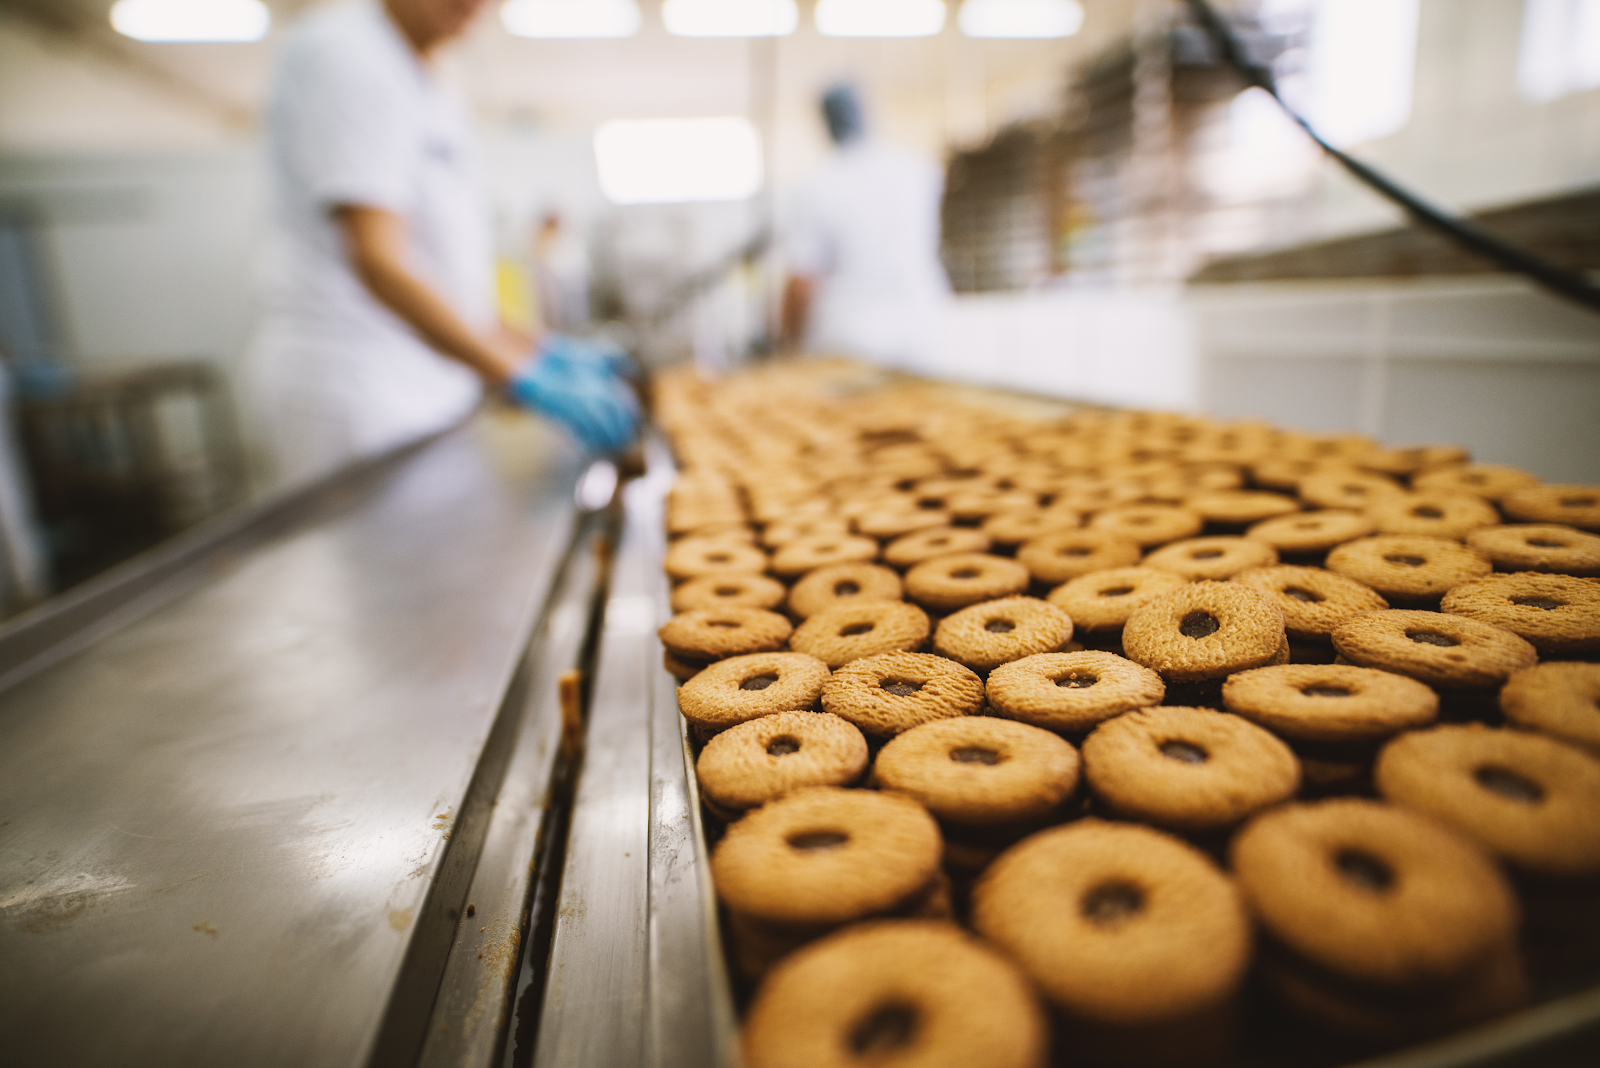 cookies on convey line production line